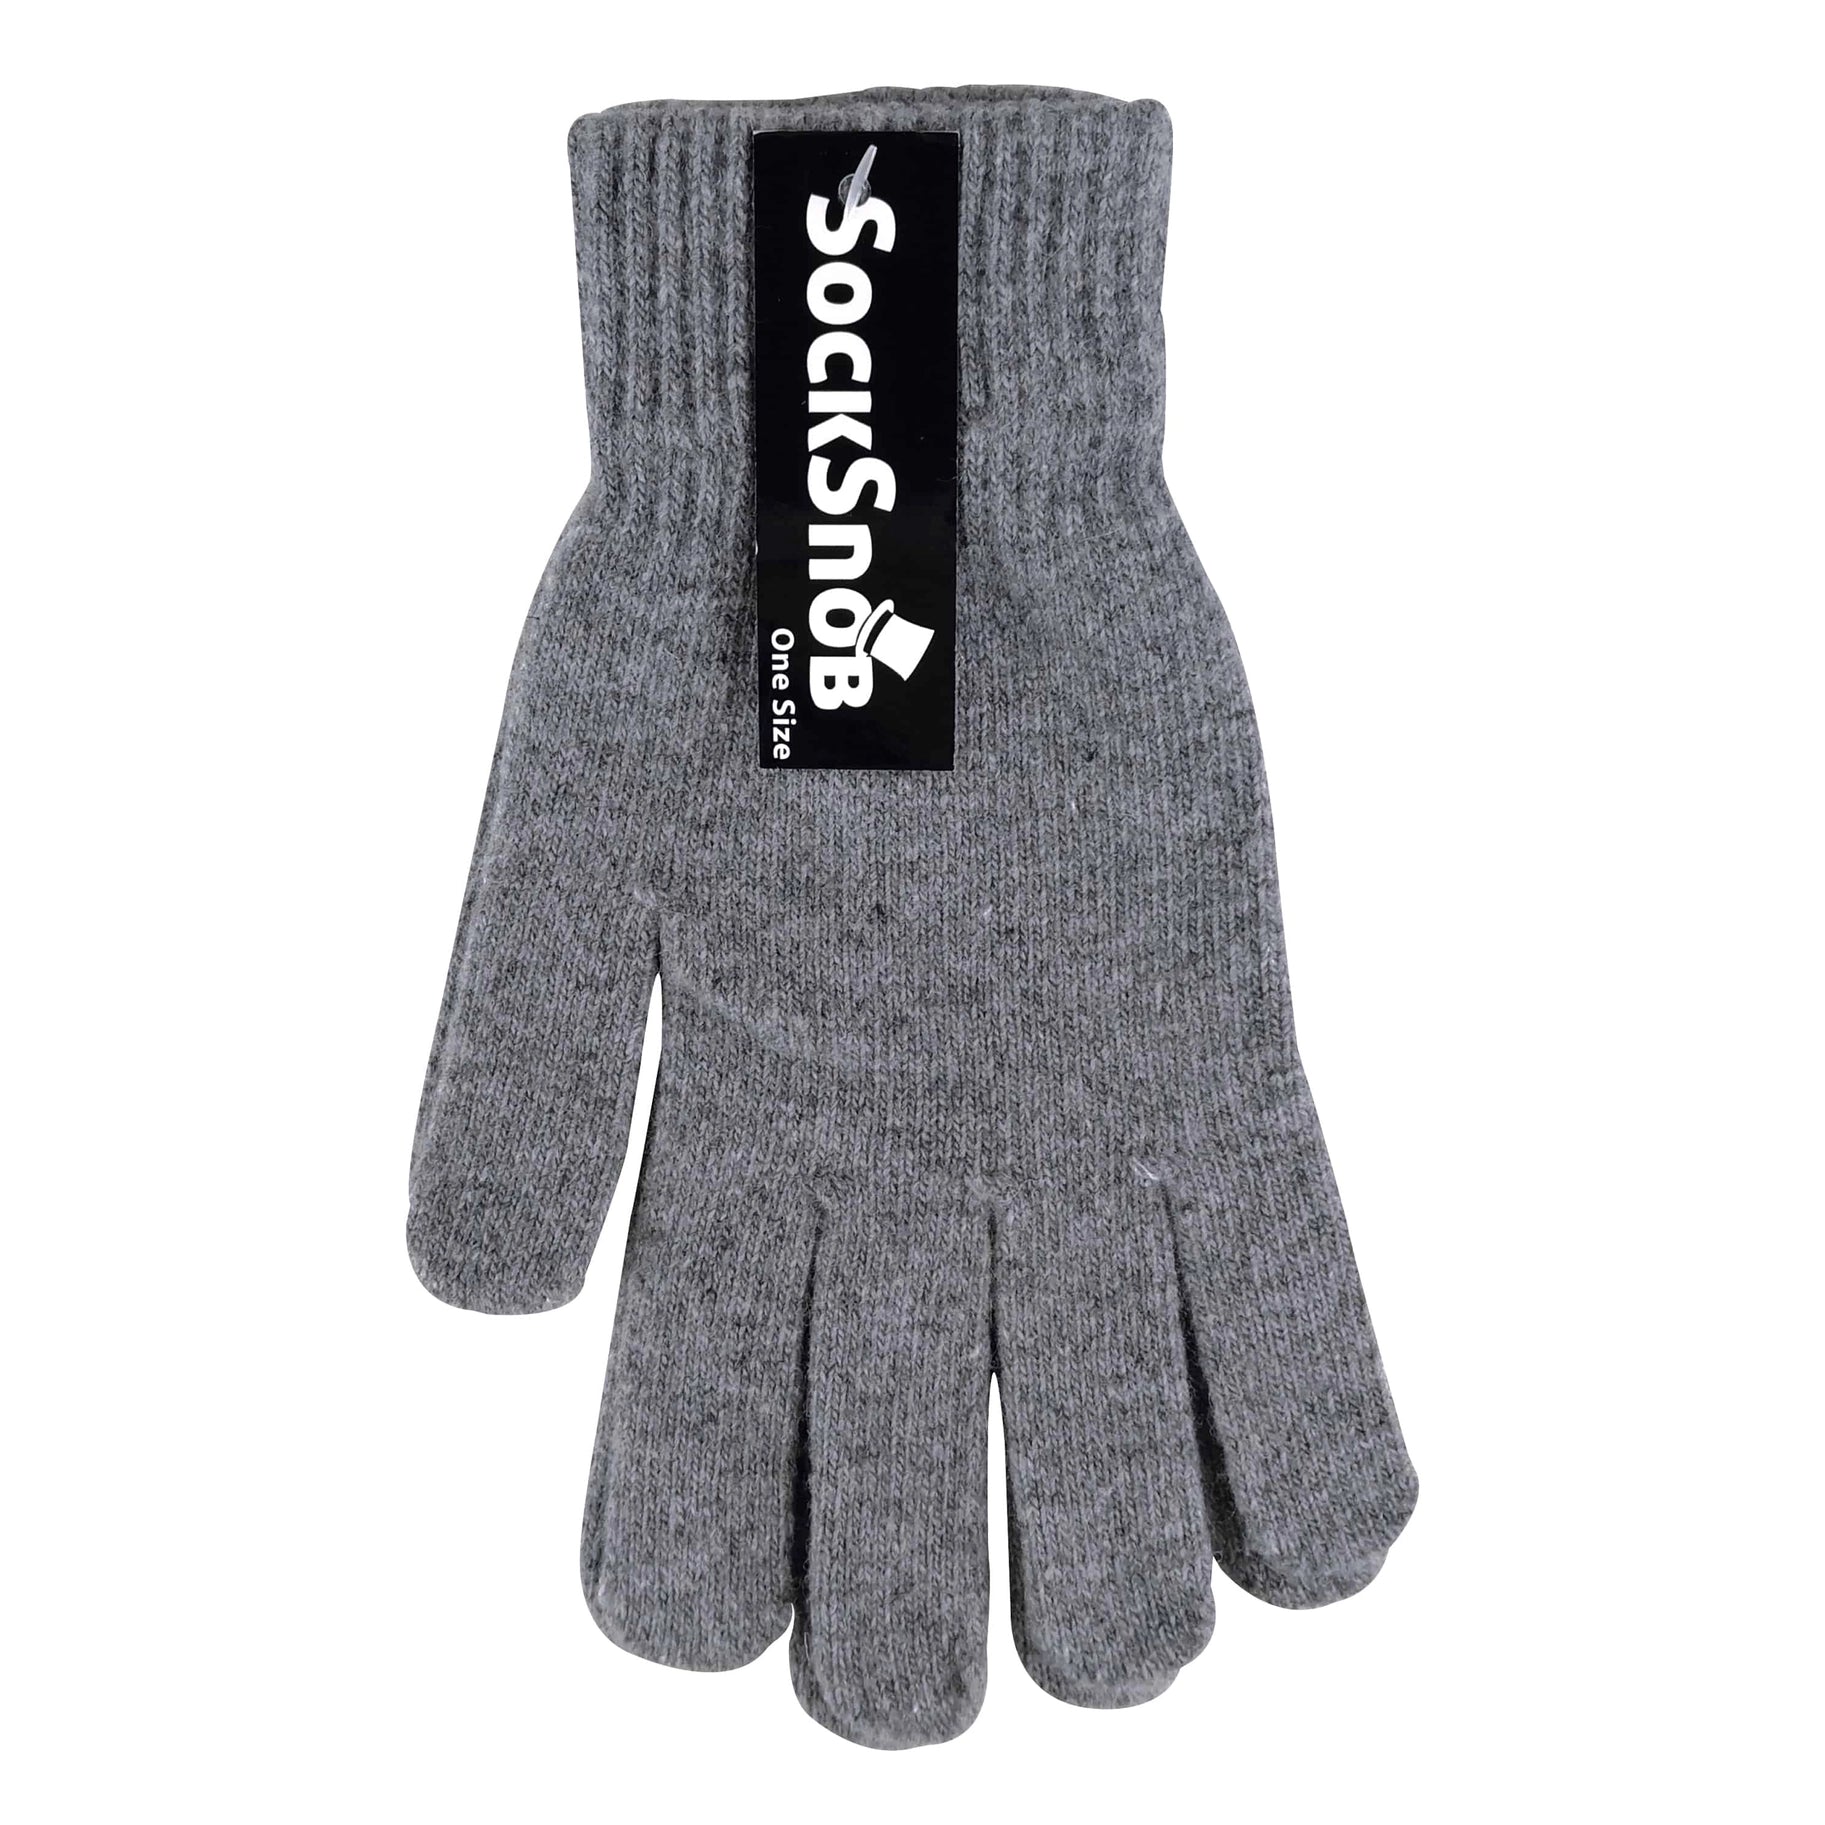 Sock Snob Adults Gloves - Knitted Magic Thermal Wool